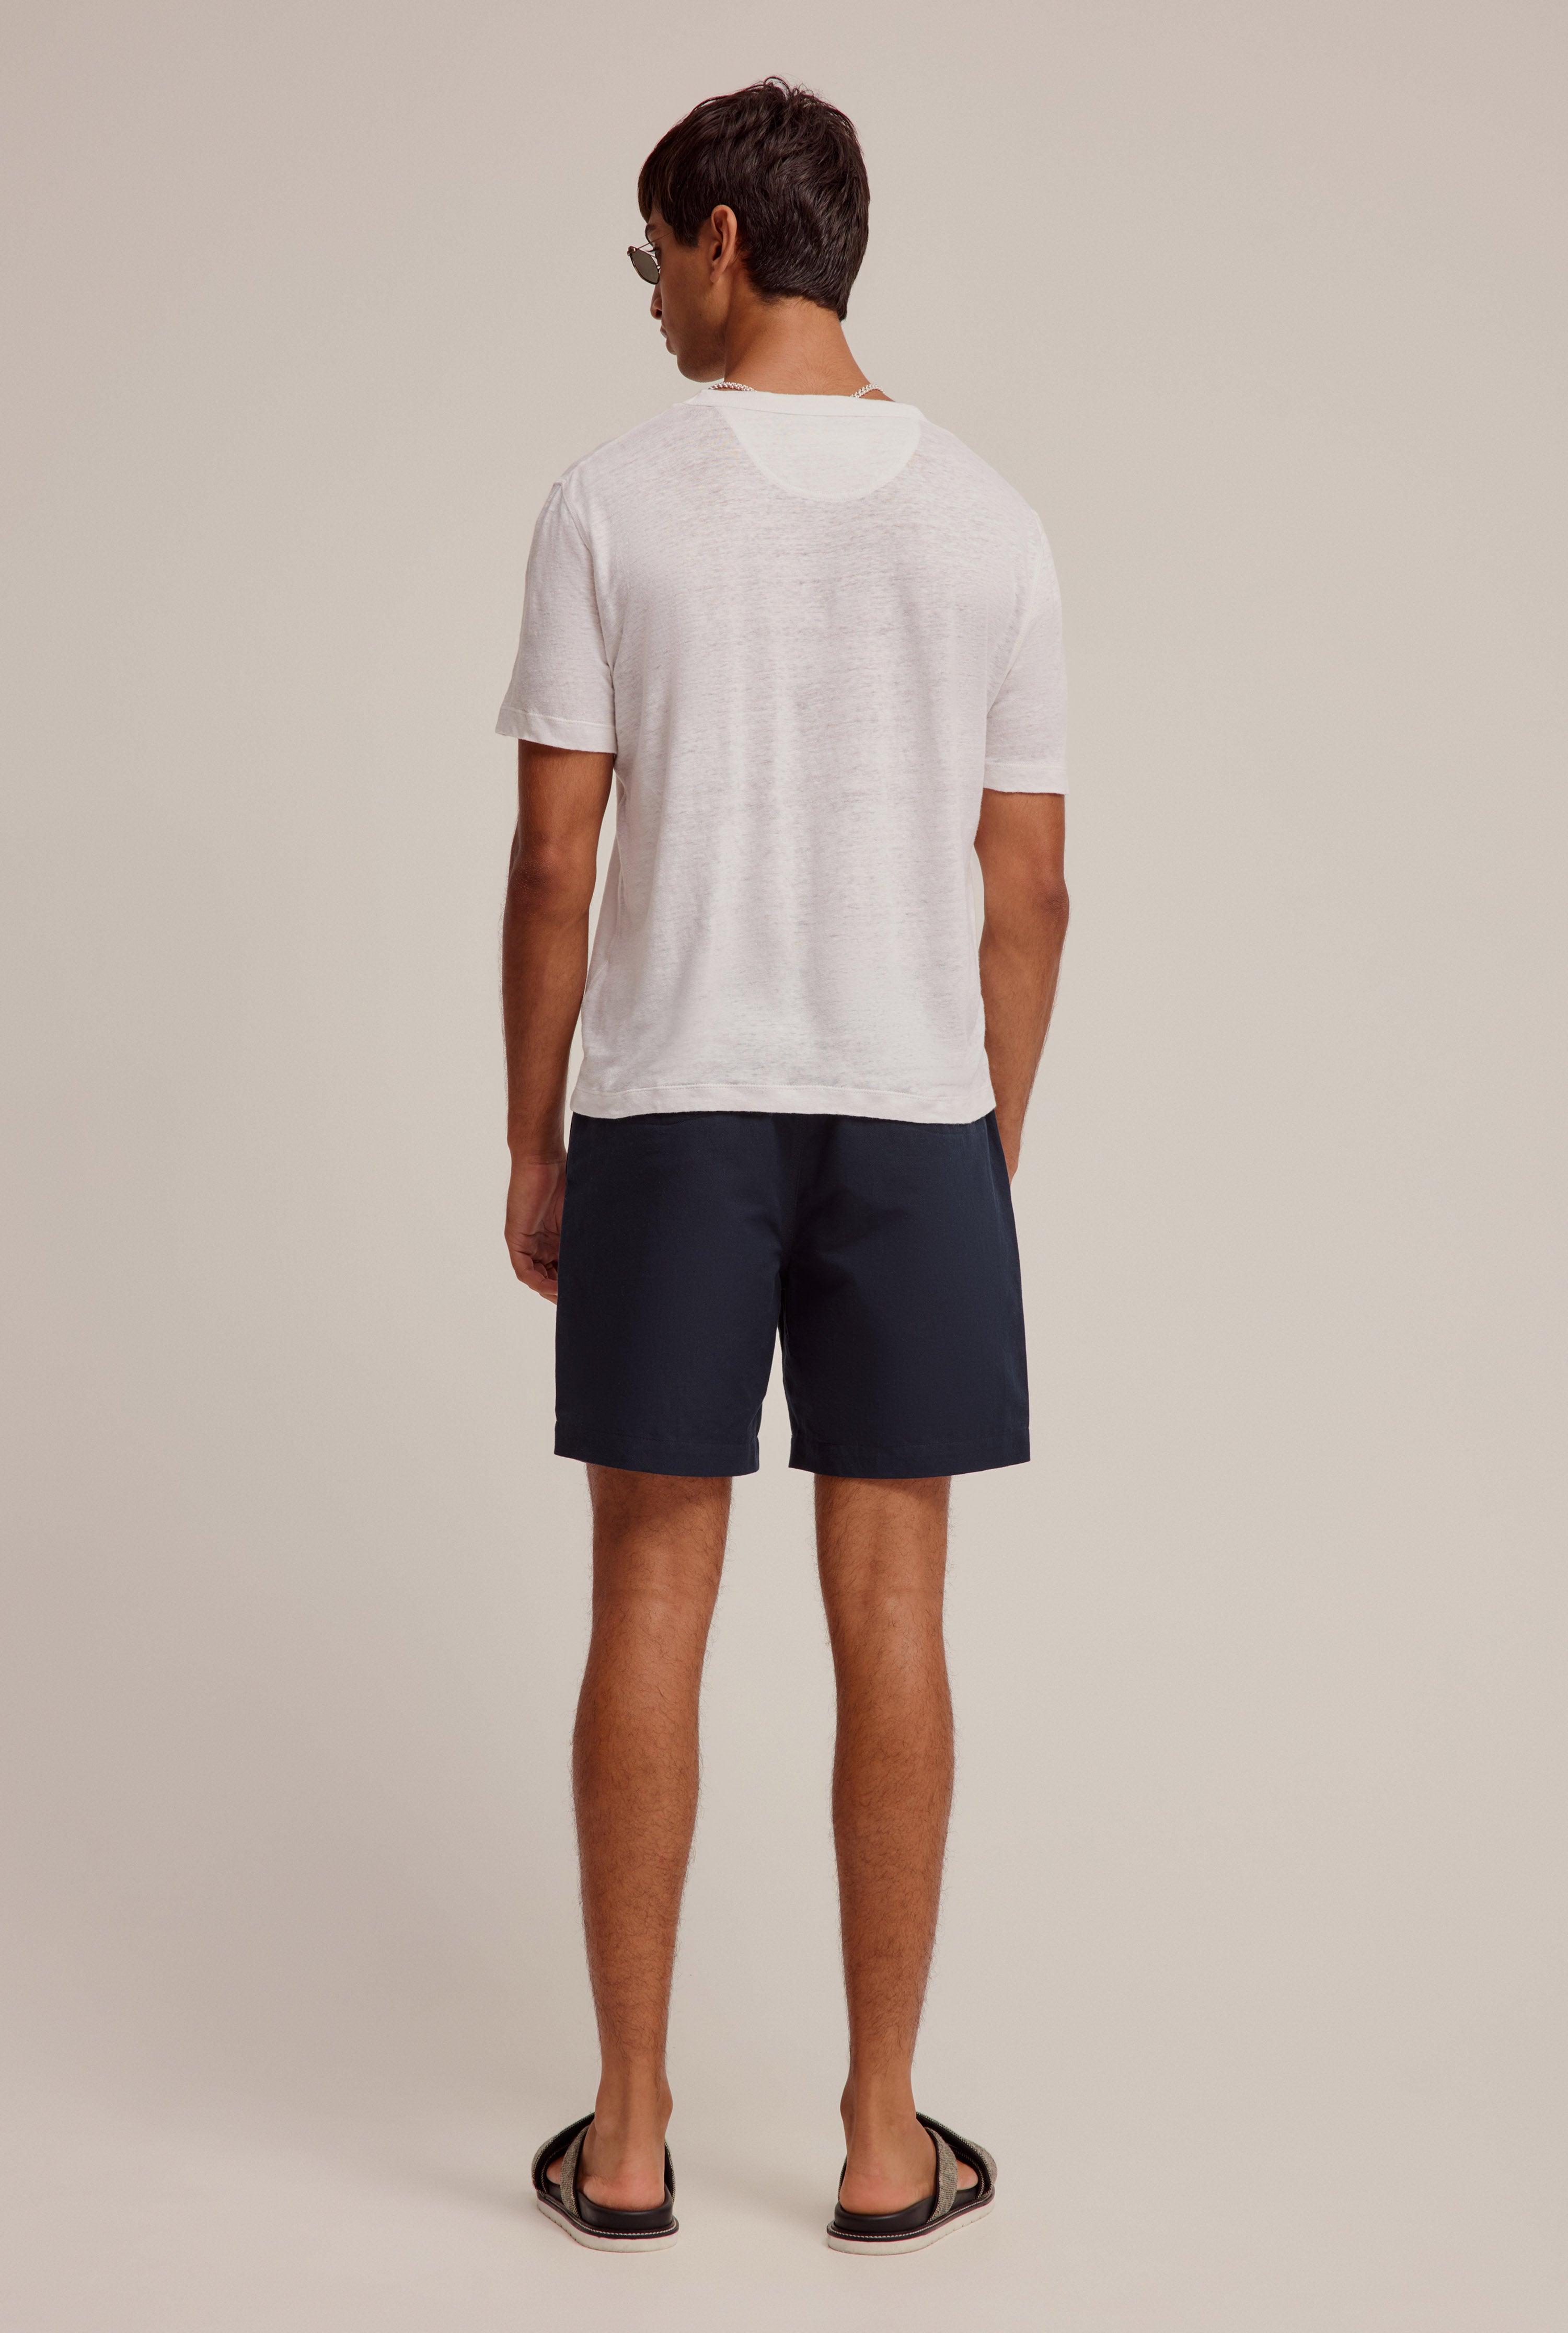 Cotton Twill Side Tab Short - Navy/Natural Tape